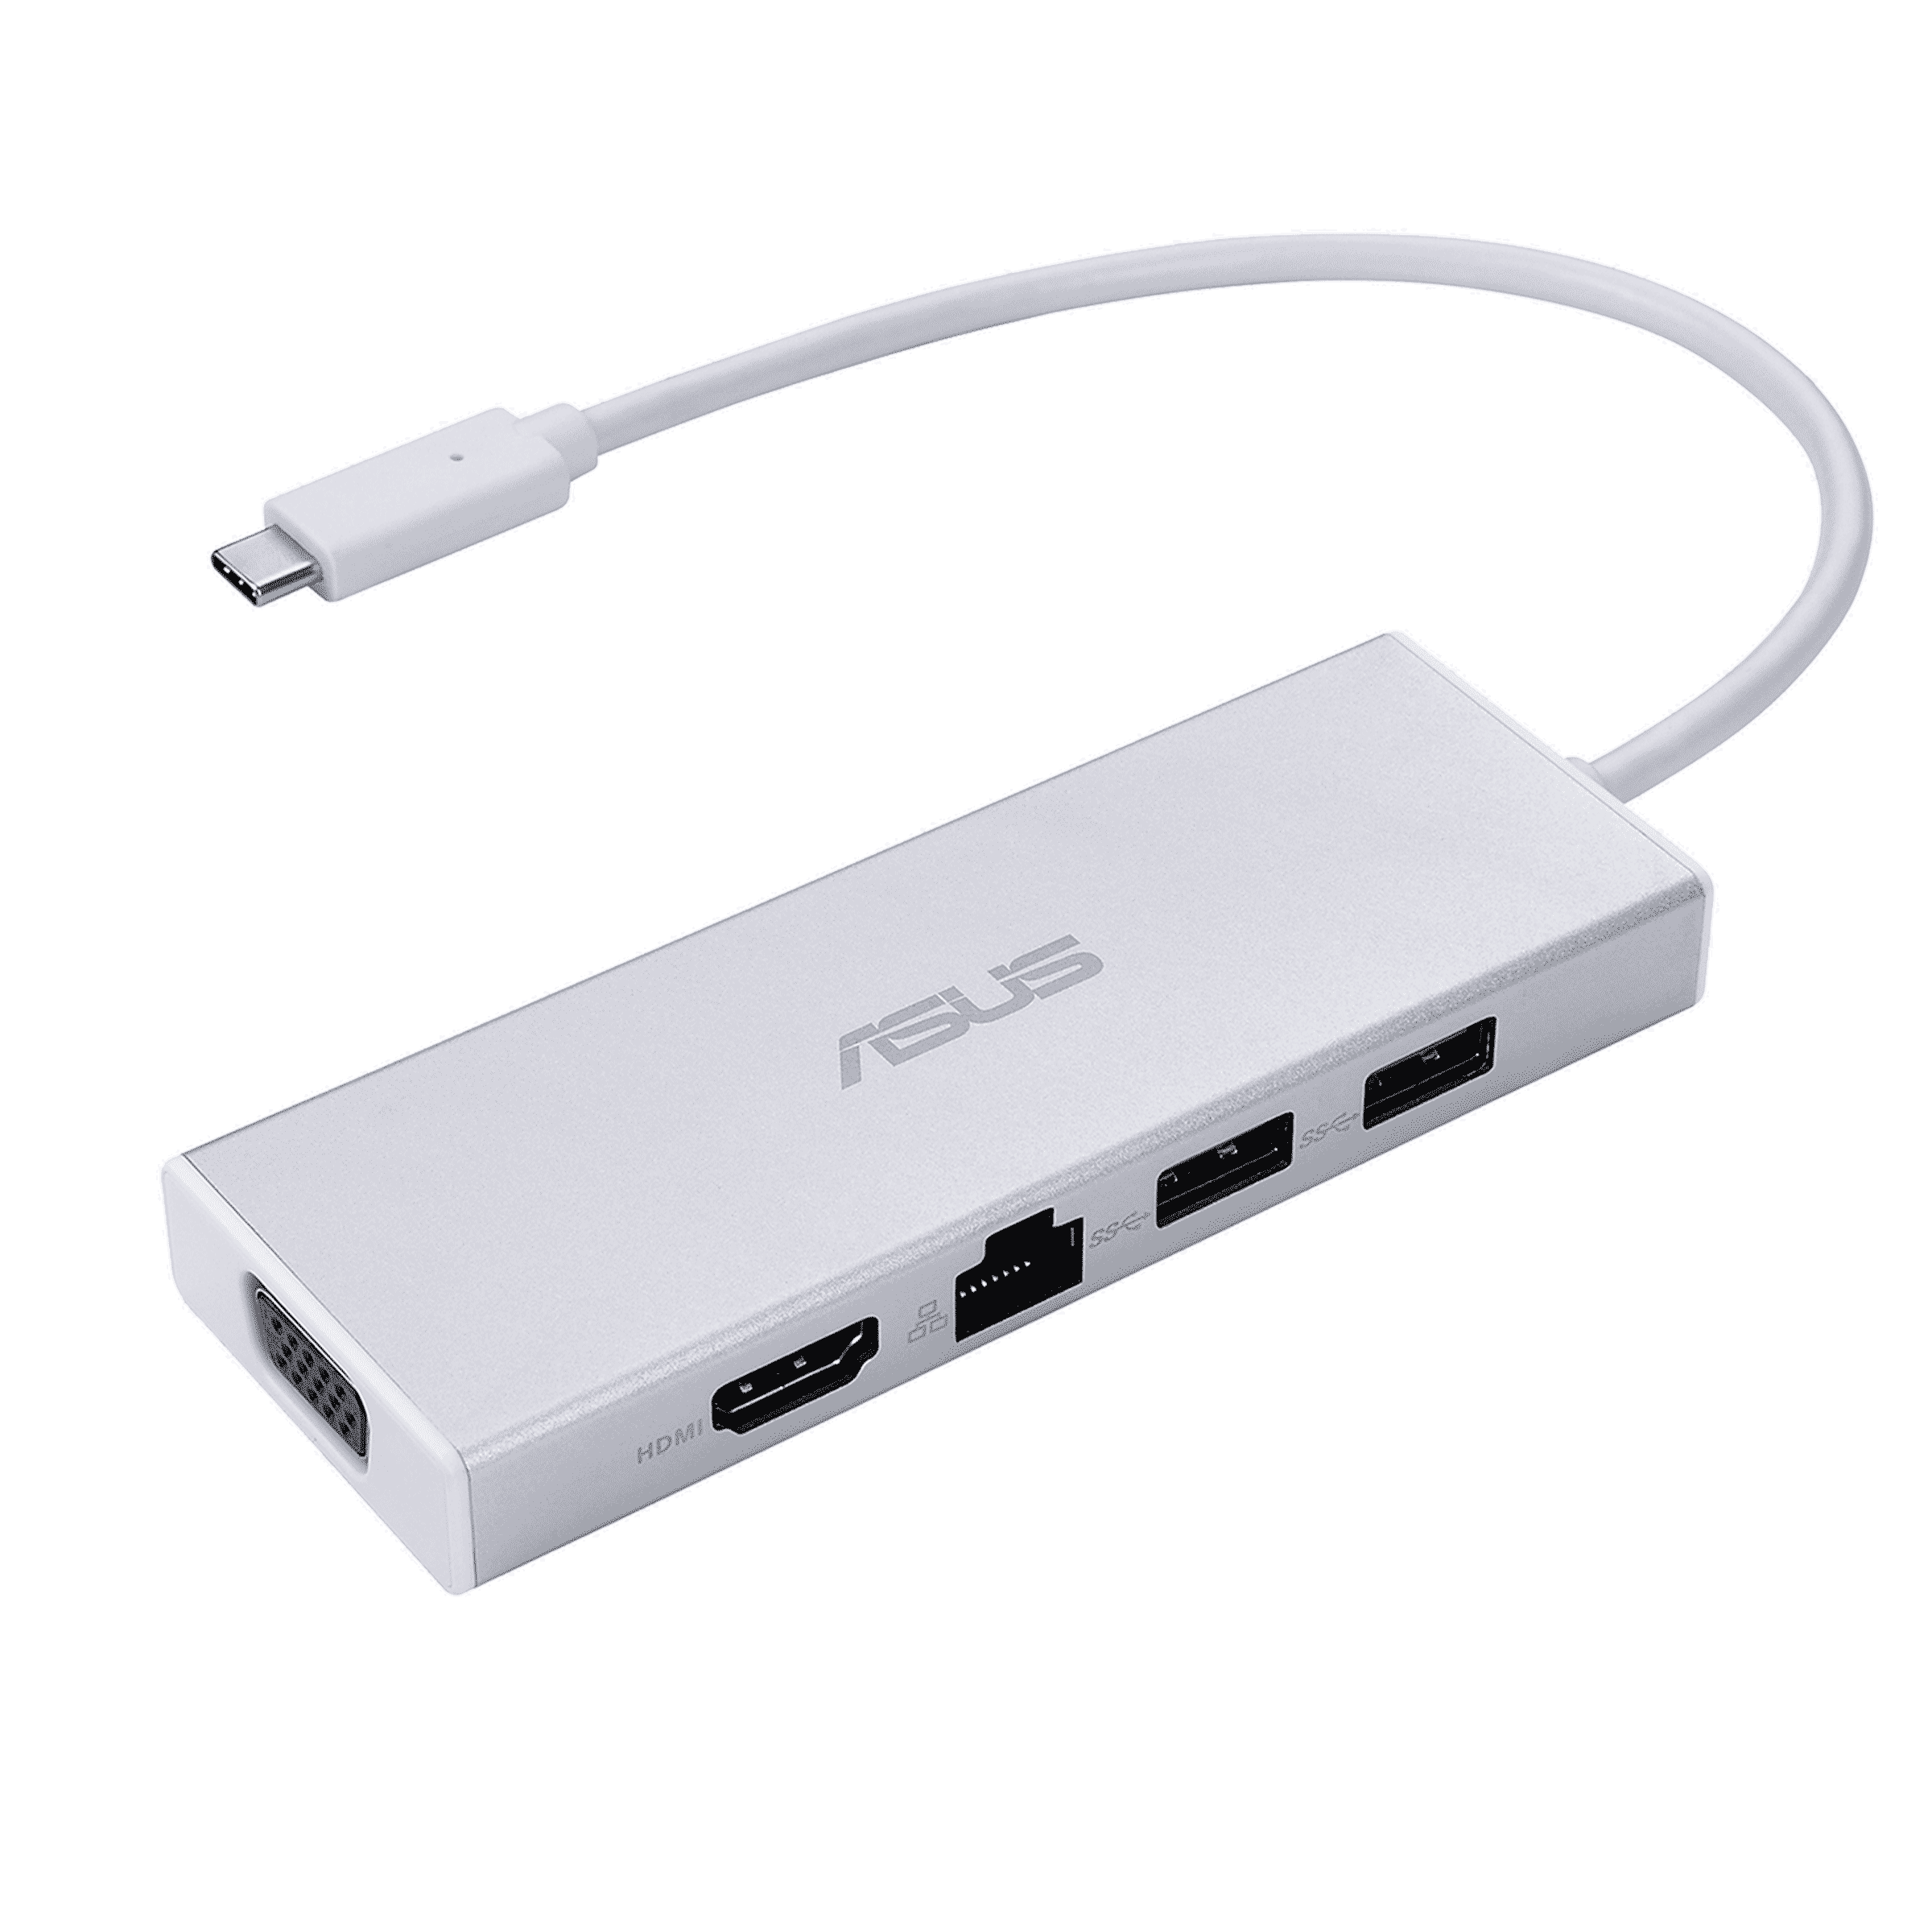 study today Intermediate ASUS OS200 USB-C DONGLE｜Docks Dongles and Cable｜ASUS Global